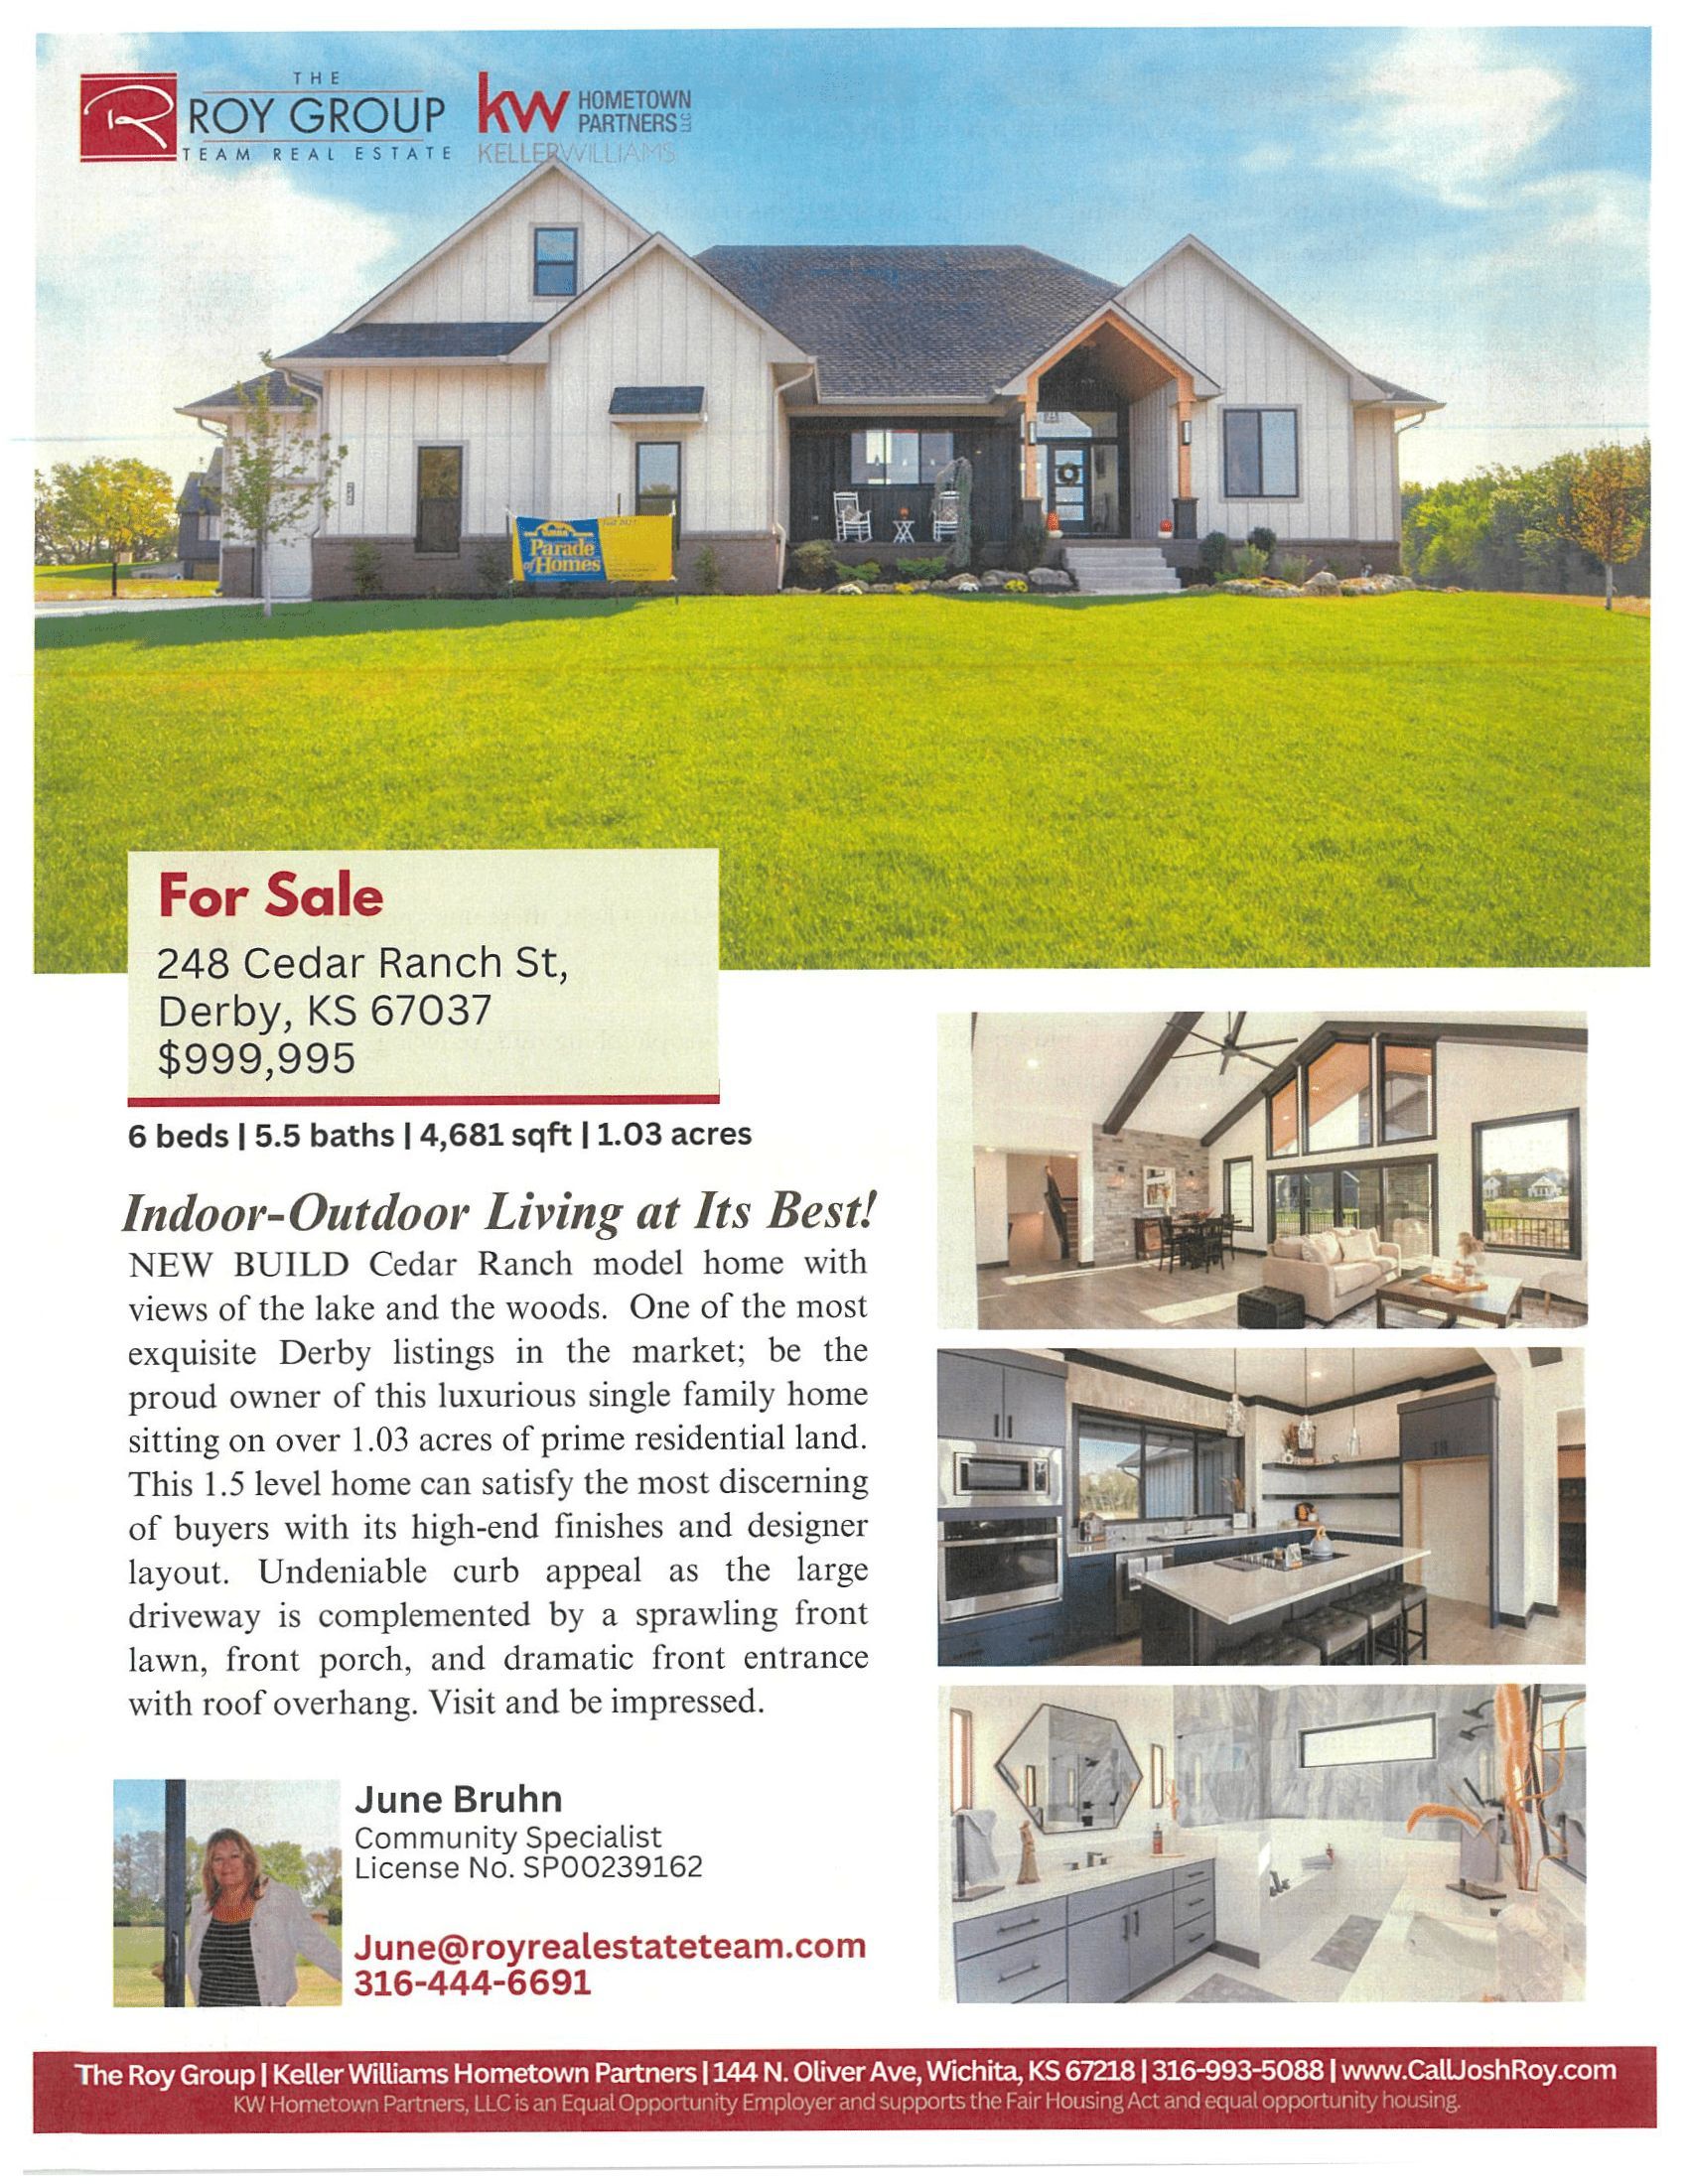 A for sale flyer with a picture of a house